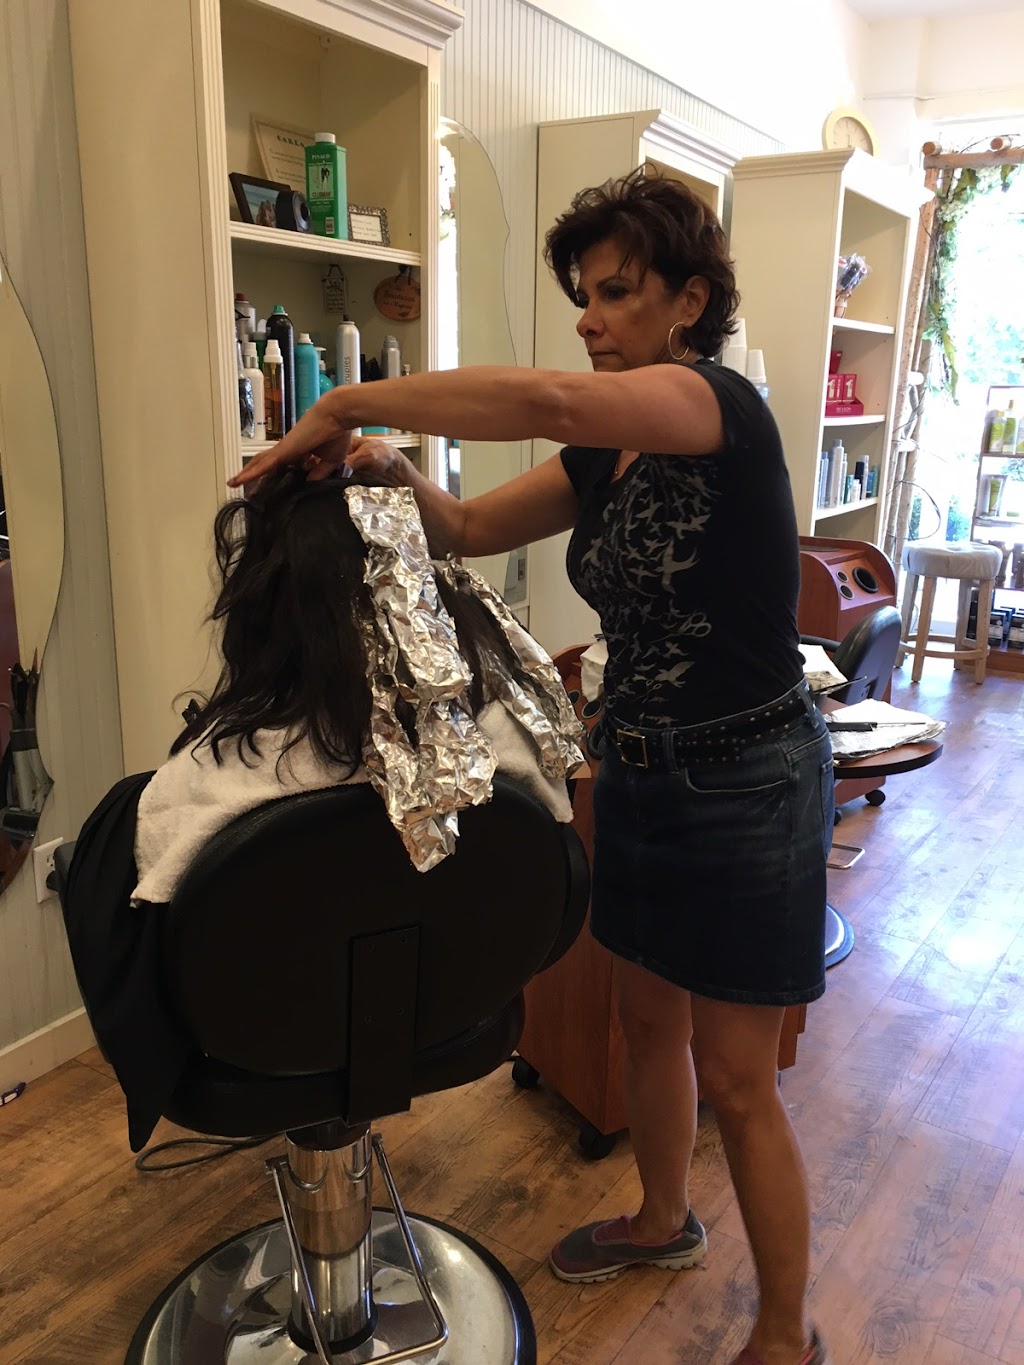 Bedford Village Hair Design | 654 Old Post Rd, Bedford, NY 10506, USA | Phone: (914) 234-7327